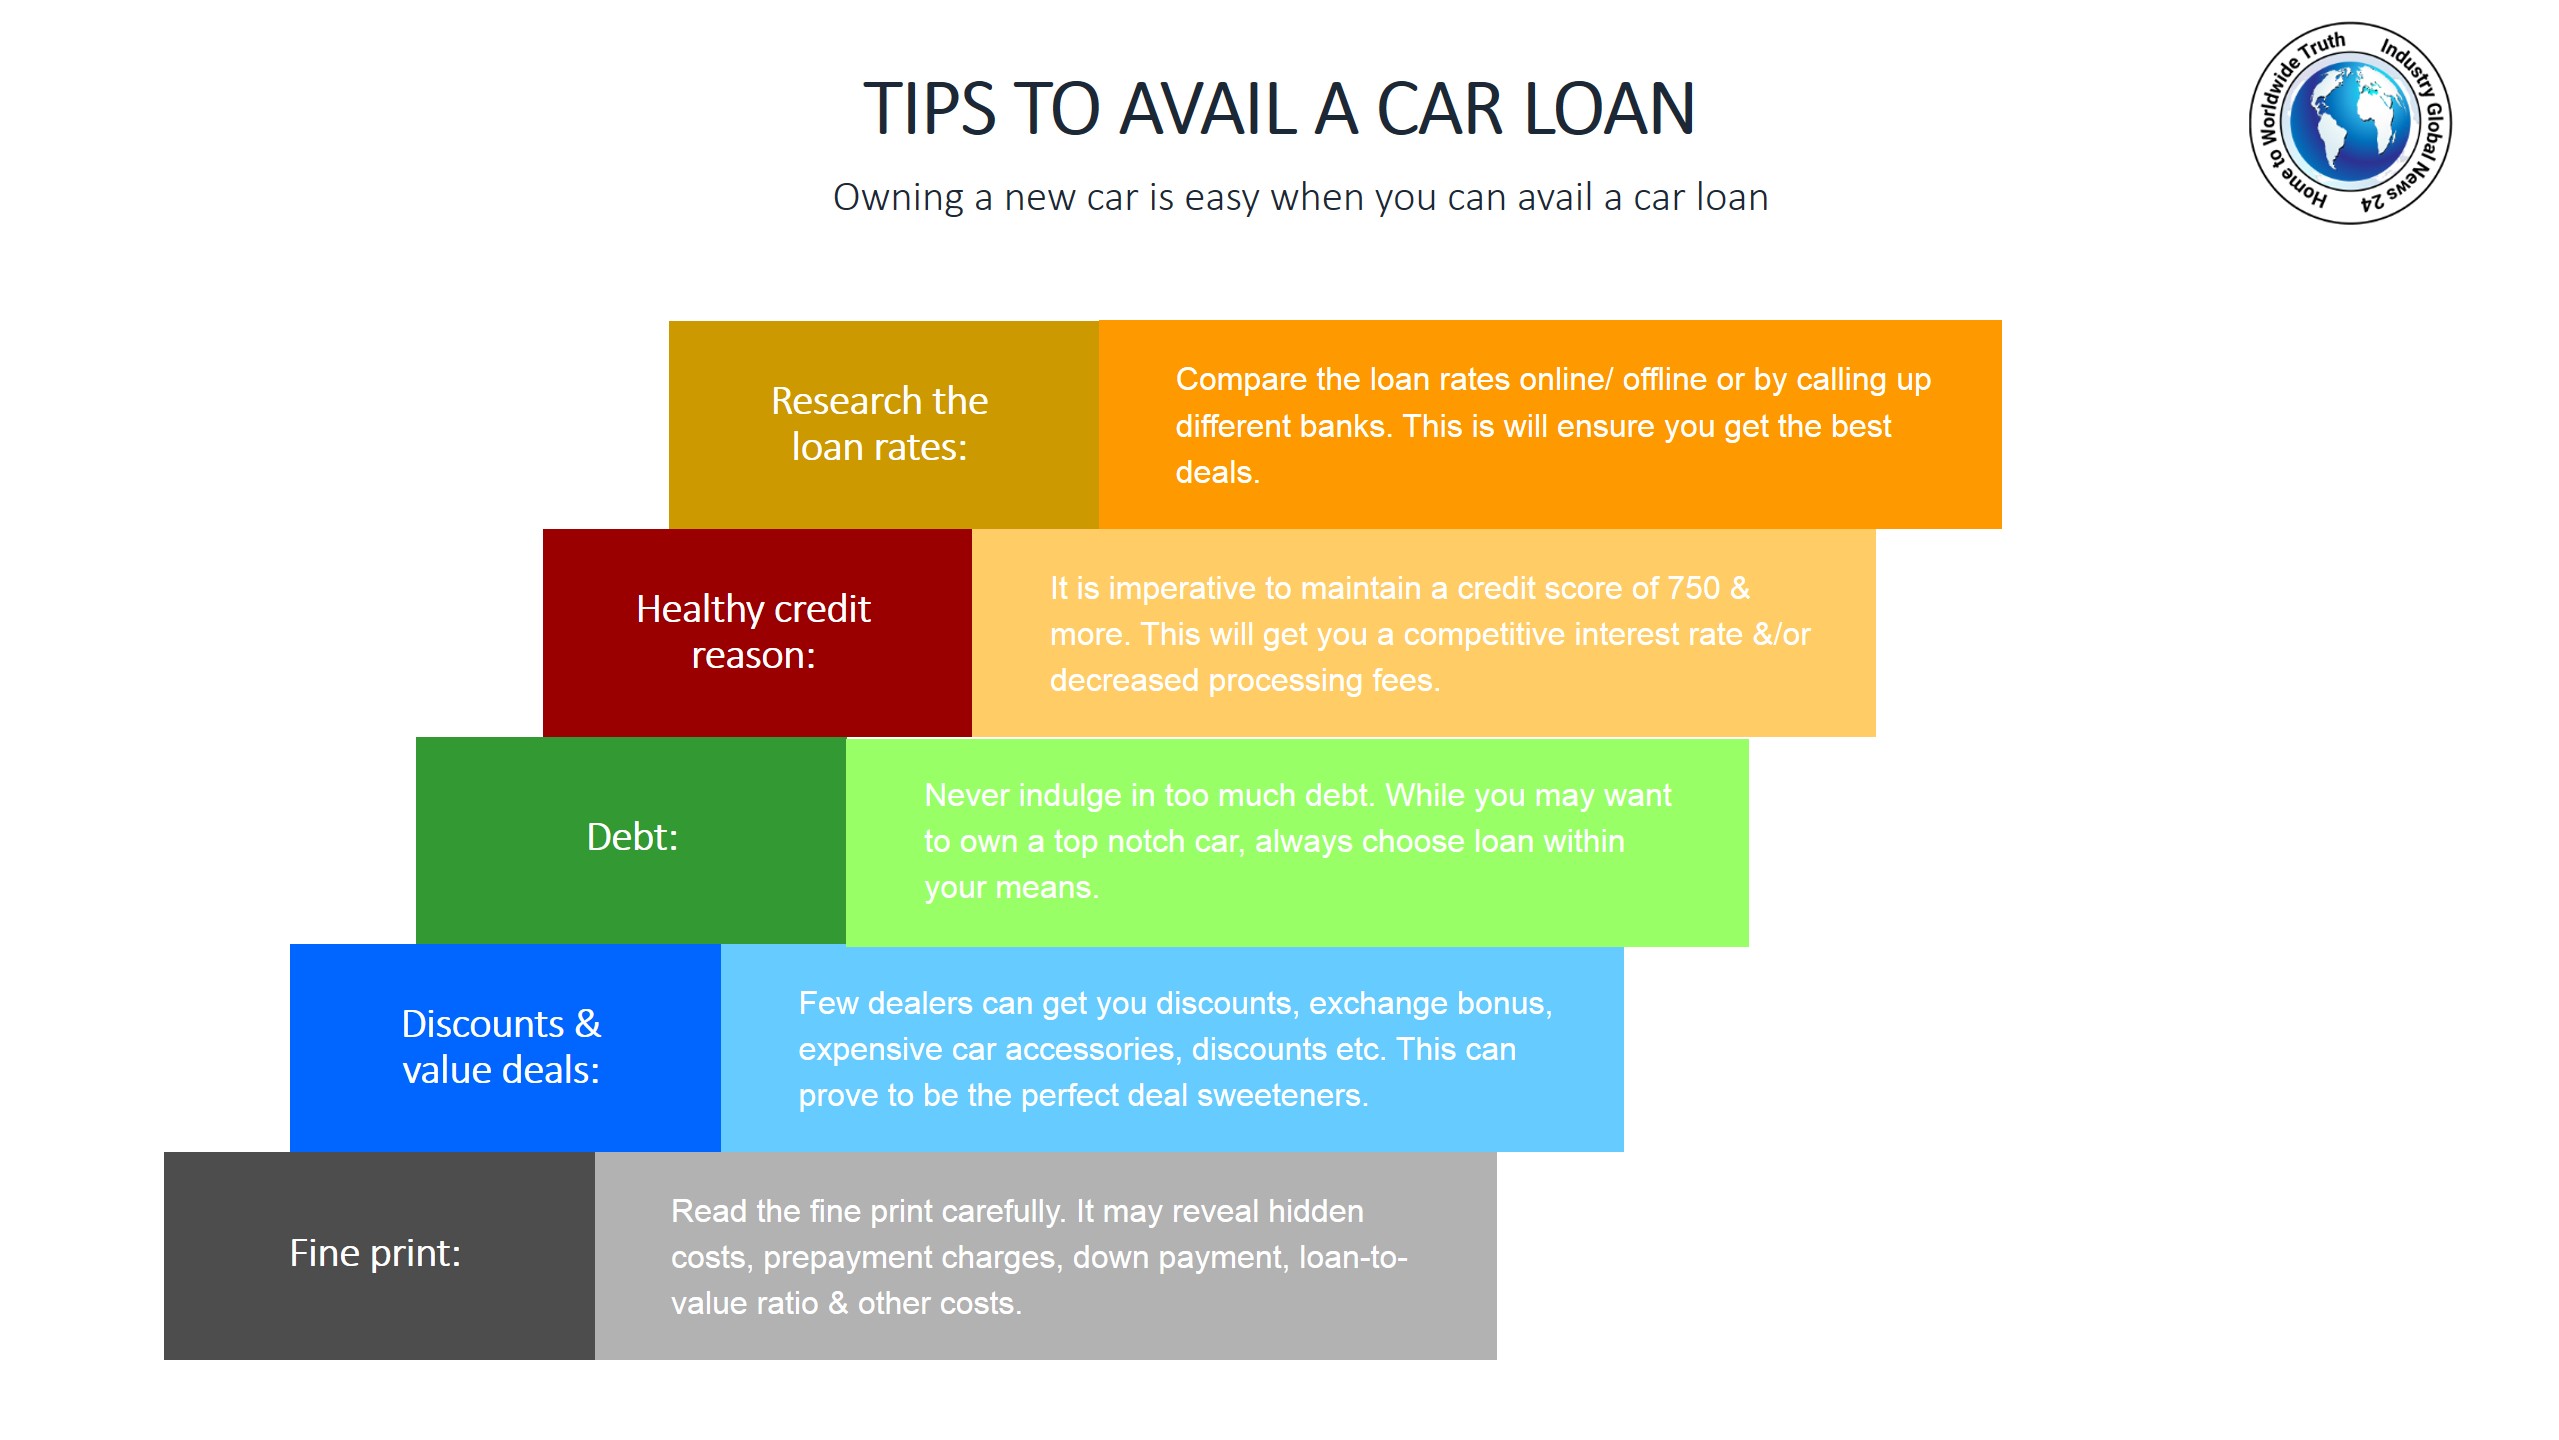 Tips to avail a car loan